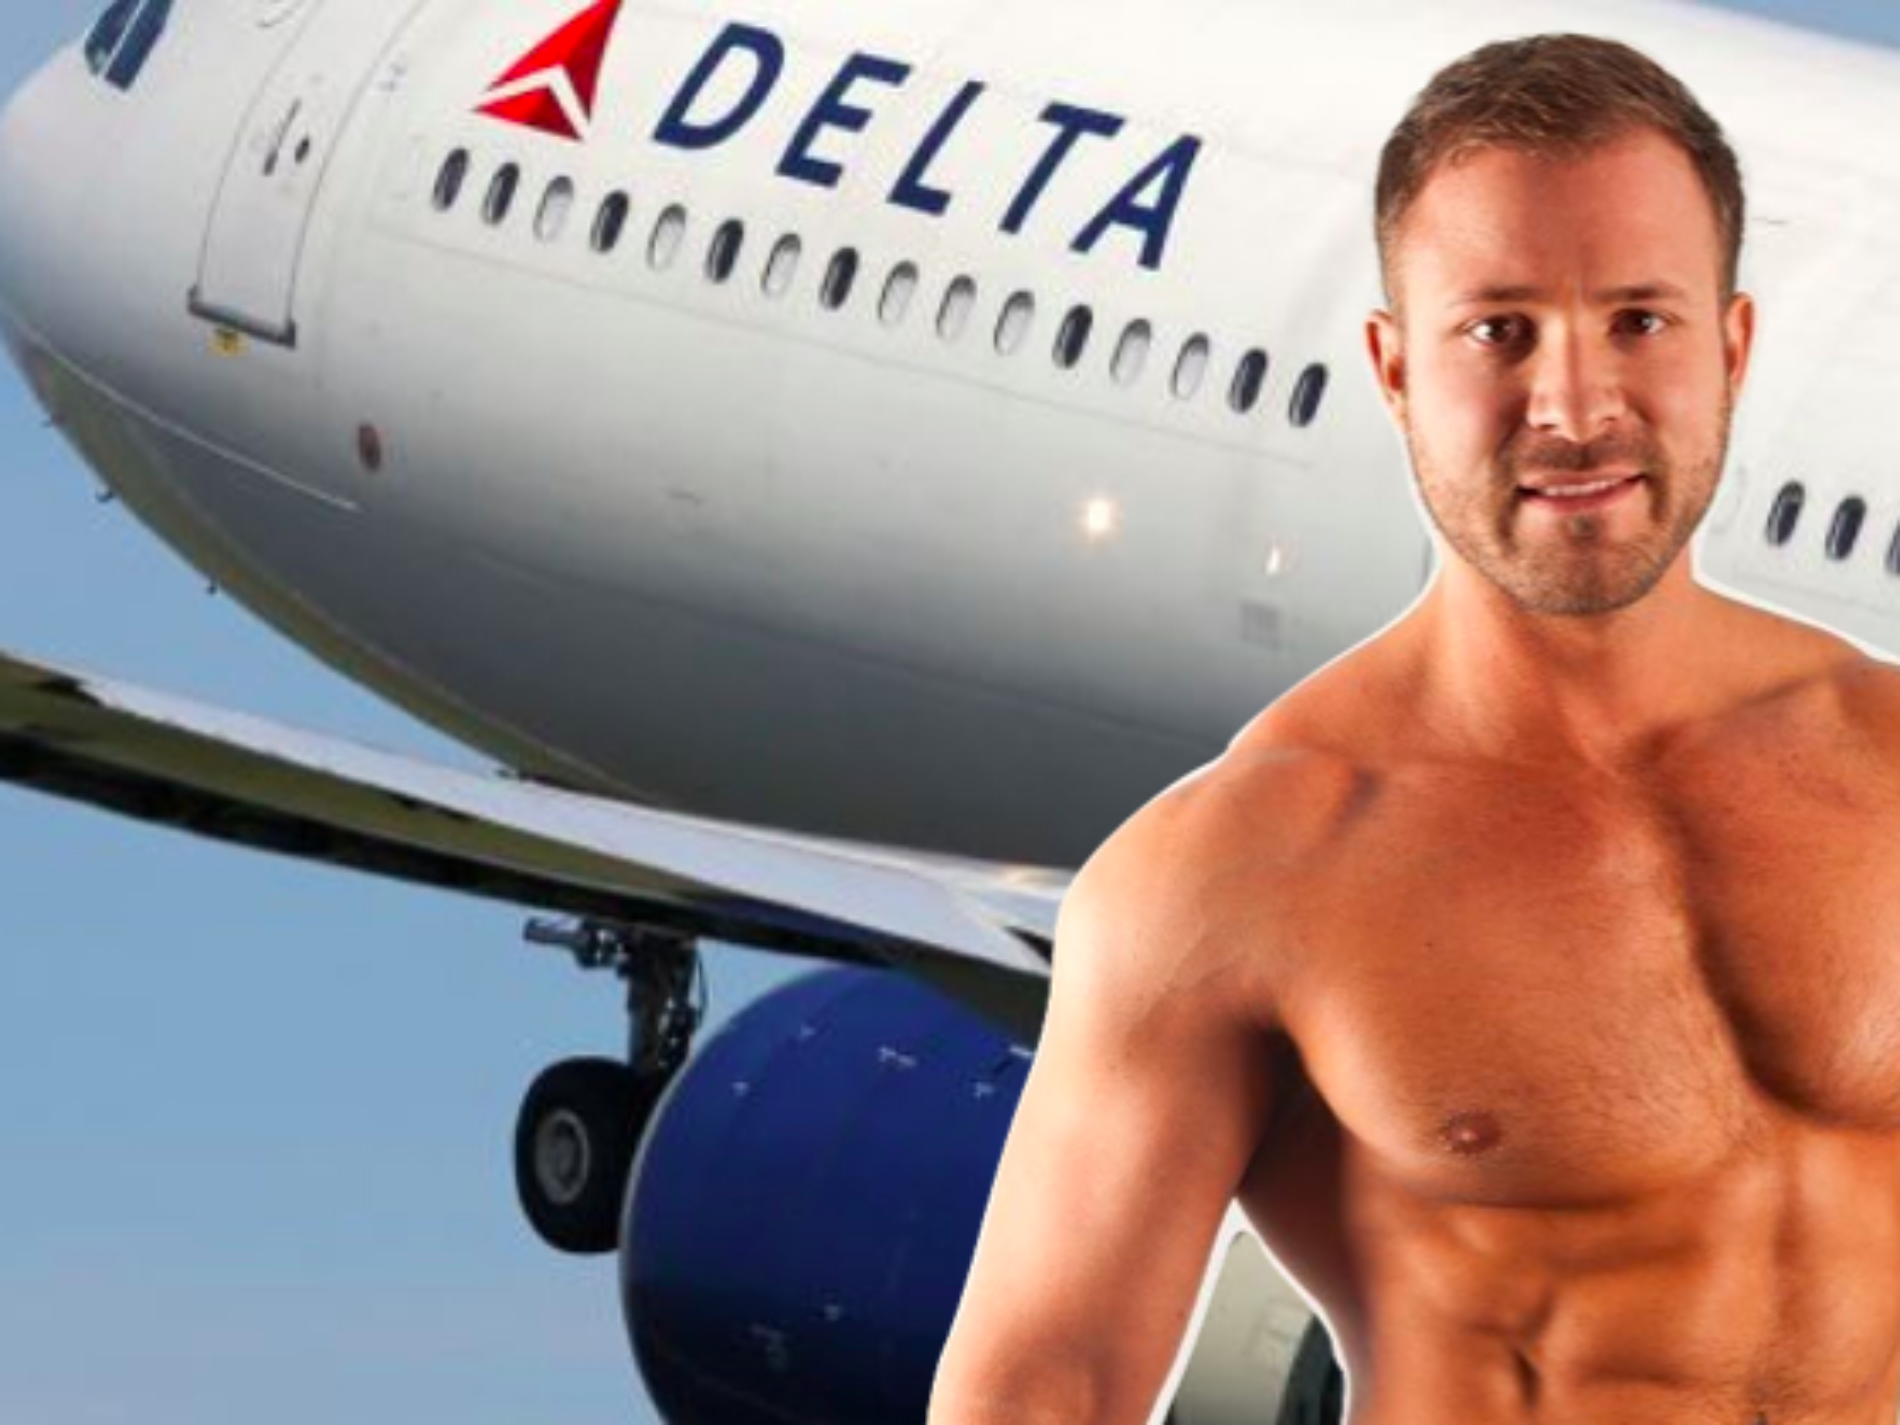 “It Started Off As A Grindr Conversation.” Porn Star Austin Wolf Opens Up About His Infamous Delta Flight Hookup